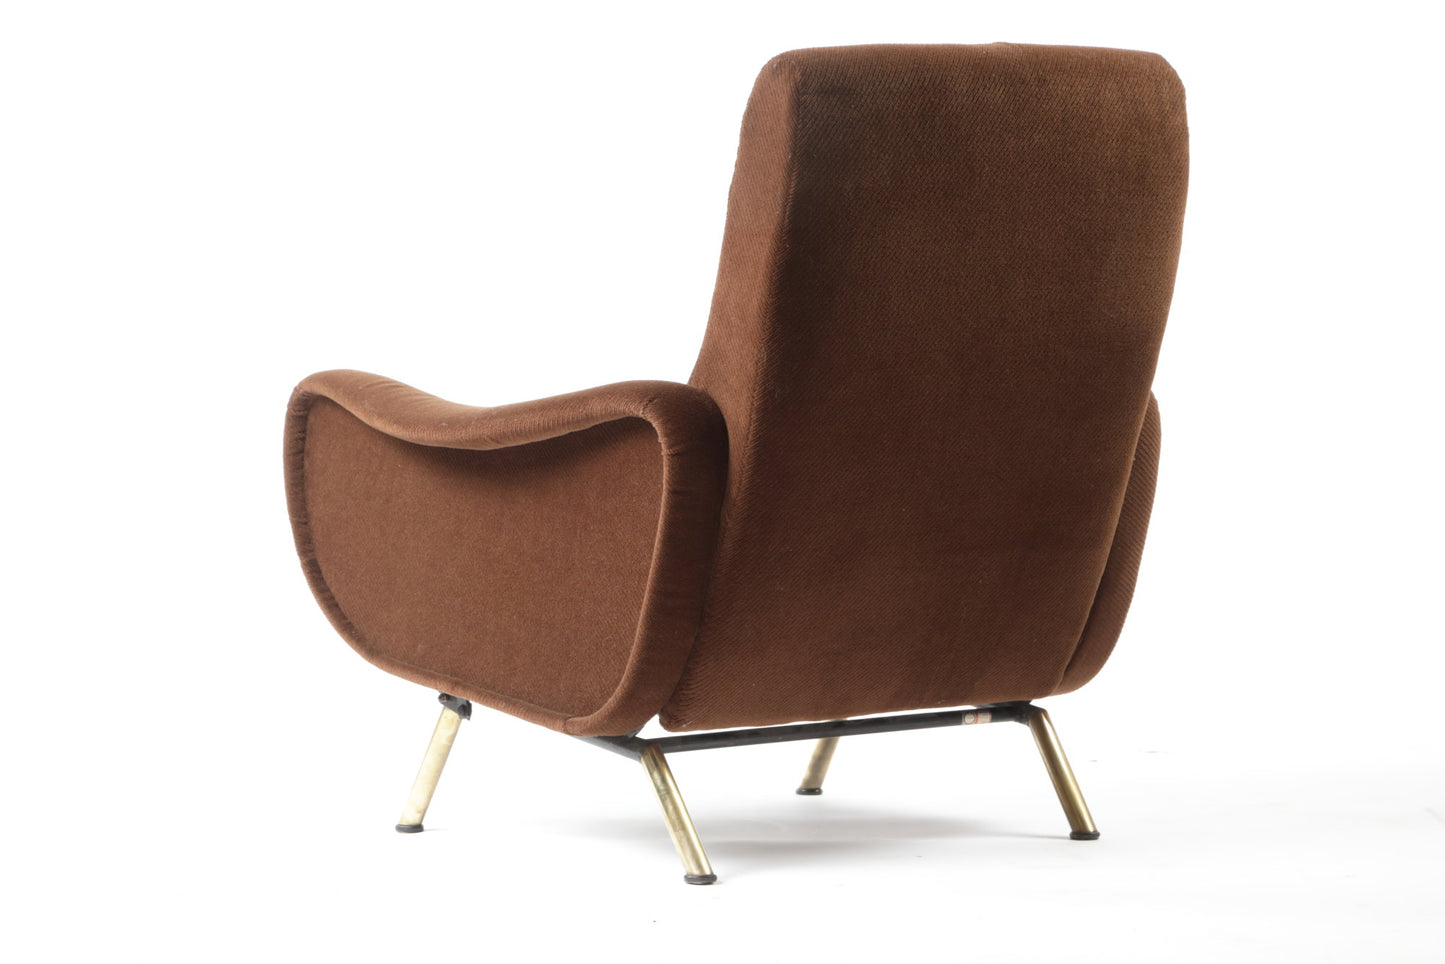 Lady armchair by Marco Zanuso for Arflex from the 50s